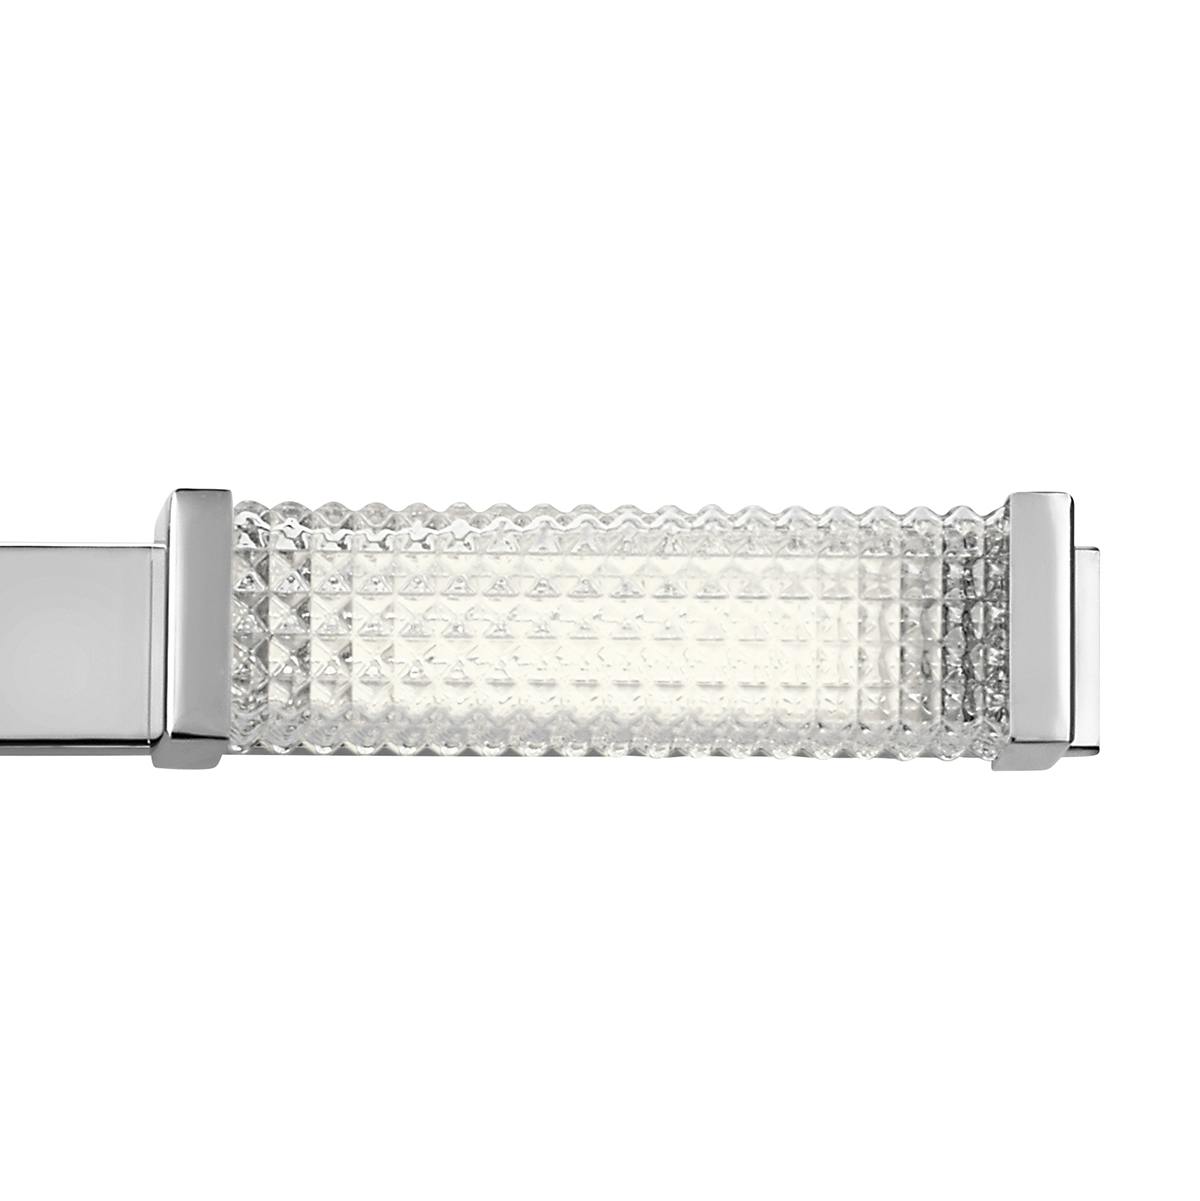 Close up view of the Ammiras 3000K 3 Light Vanity Light Chrome on a white background